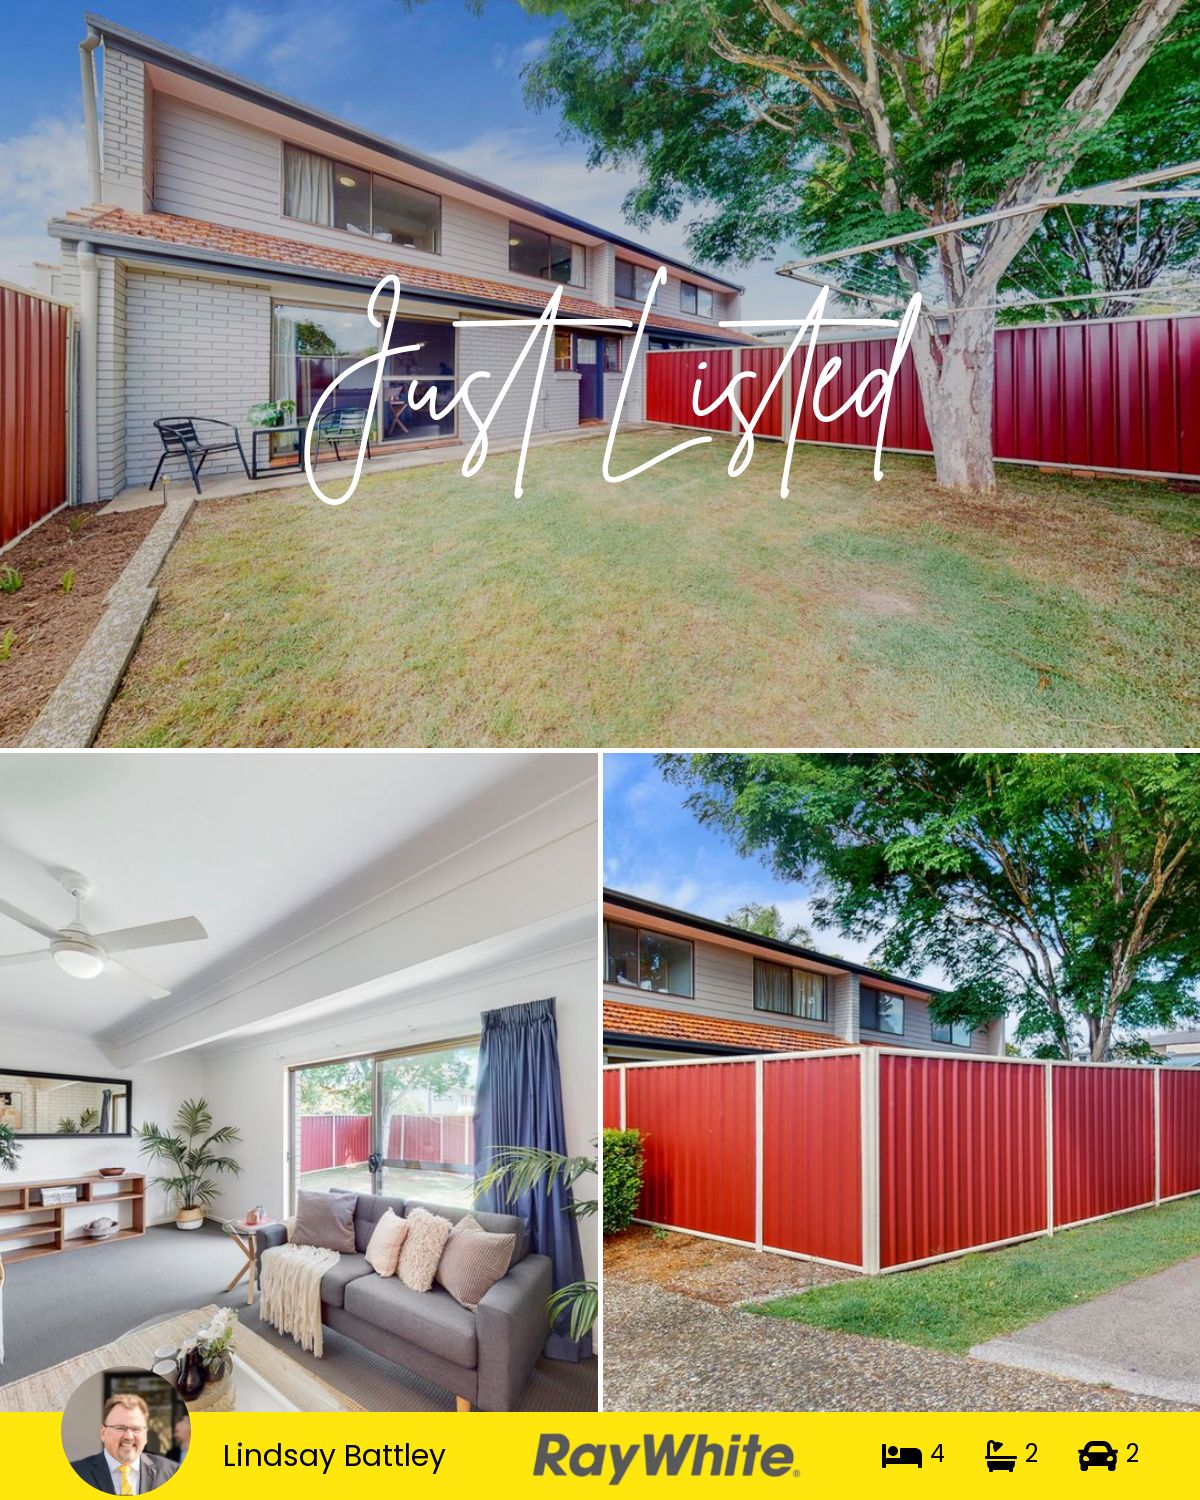 3/22 Beverley Avenue, Rochedale South, QLD 4123 | Realty.com.au